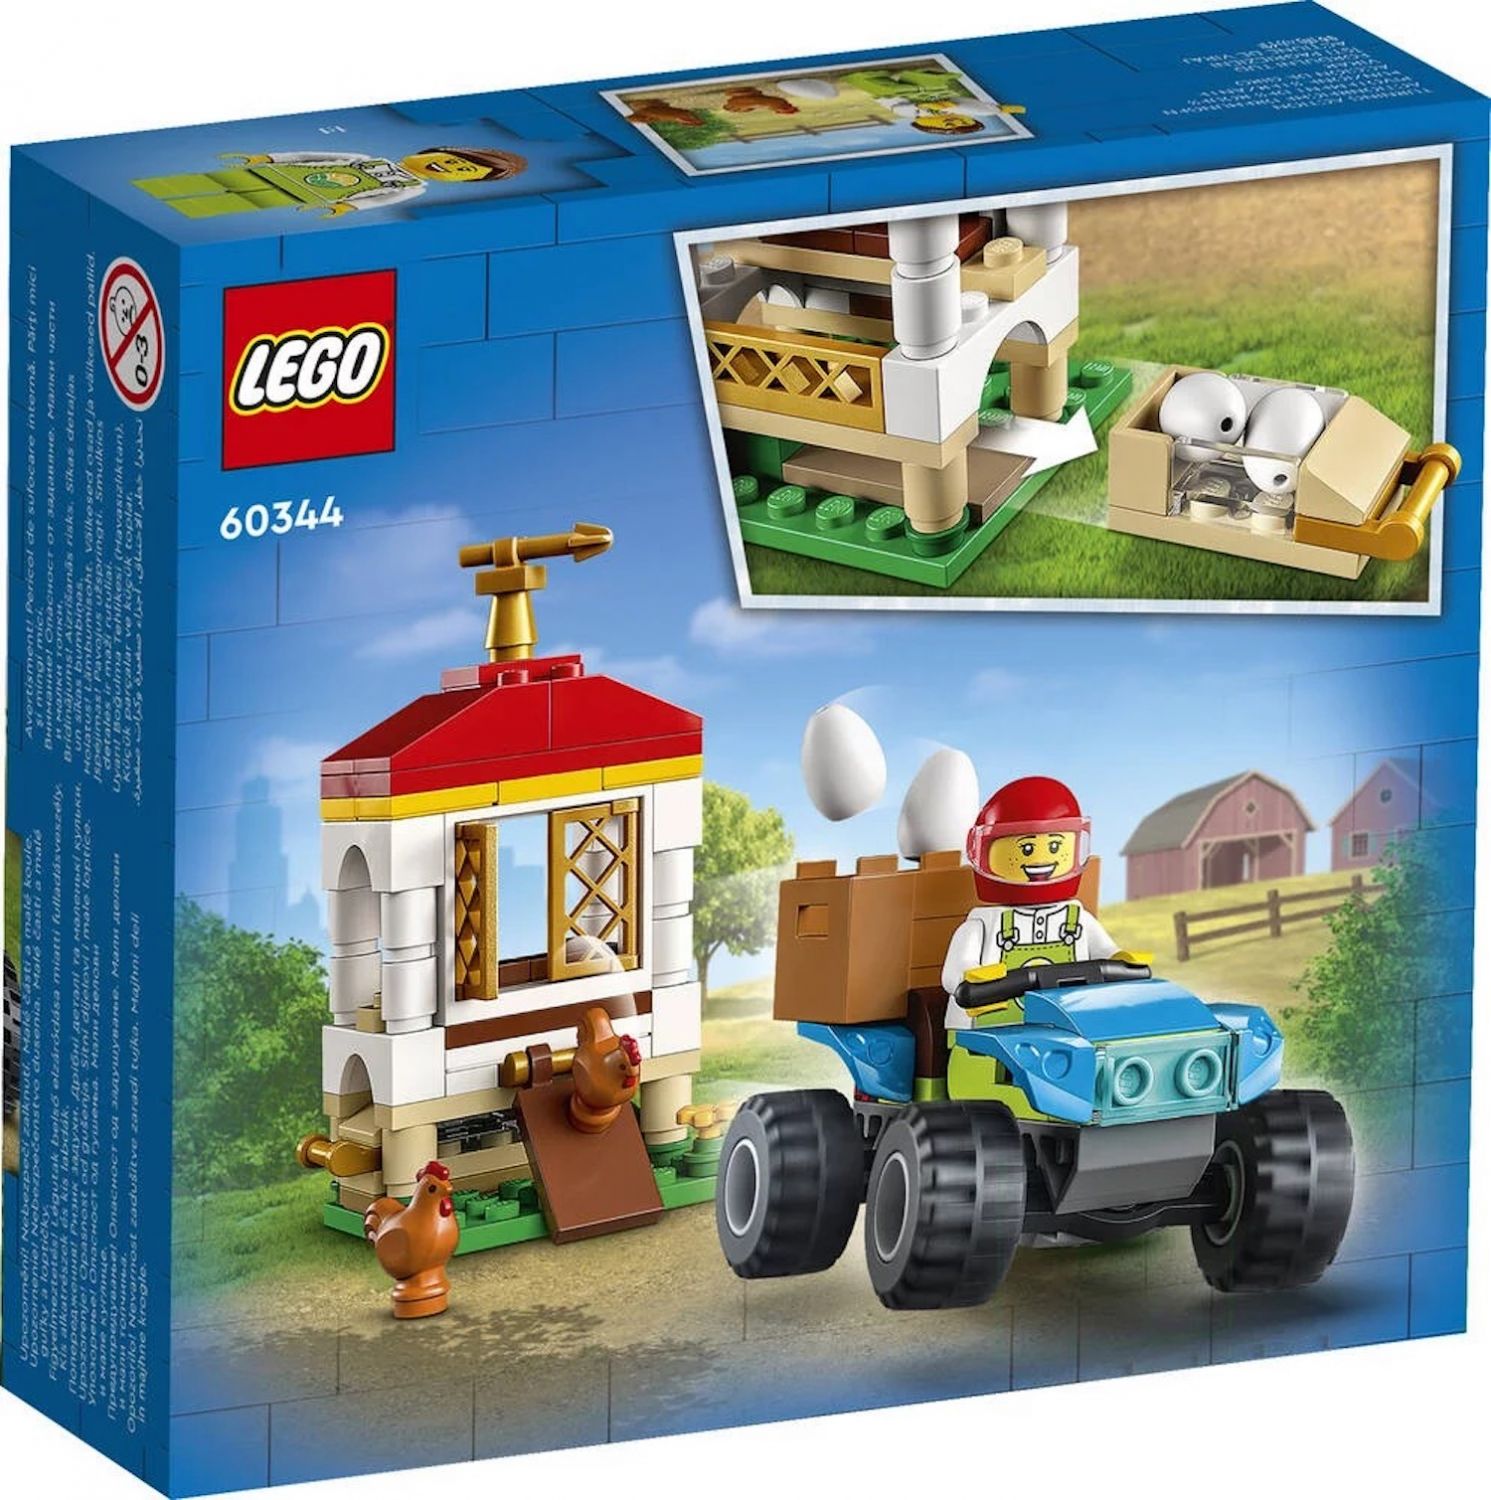 New LEGO City Sets For 2023 Revisit Some Old Themes